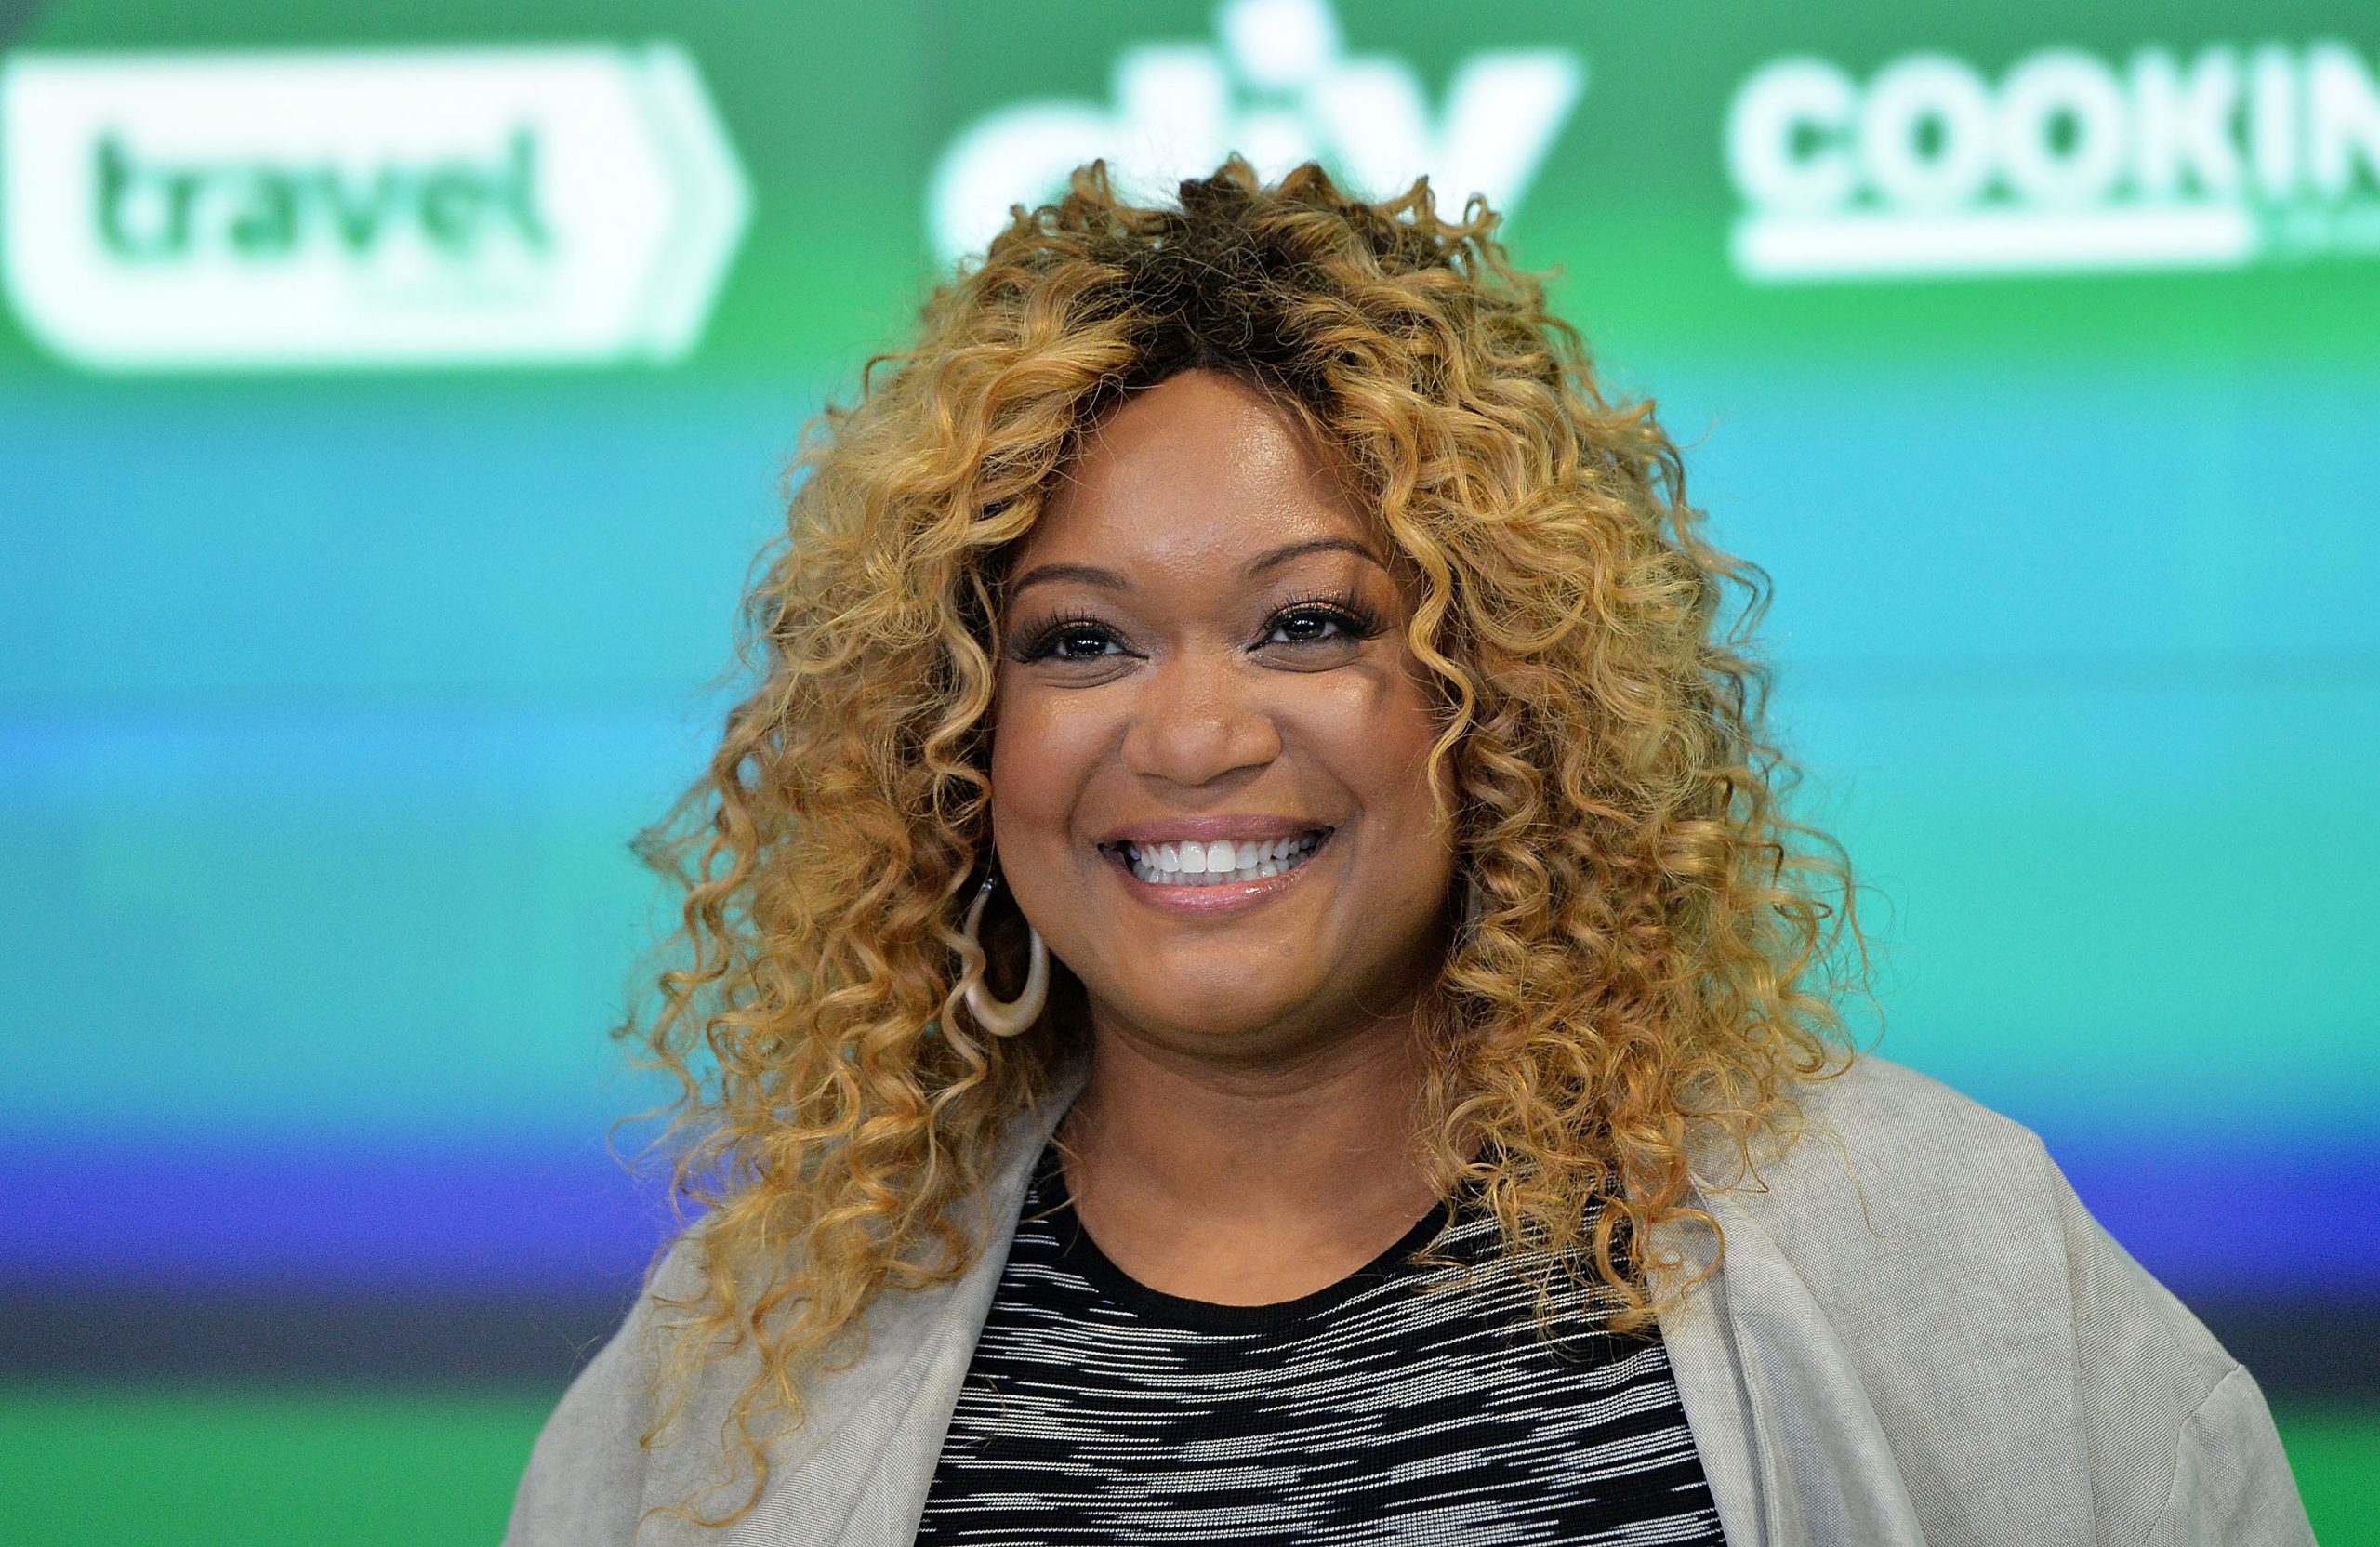 Food Network star Sunny Anderson wears a black-and-white blouse in this photograph.